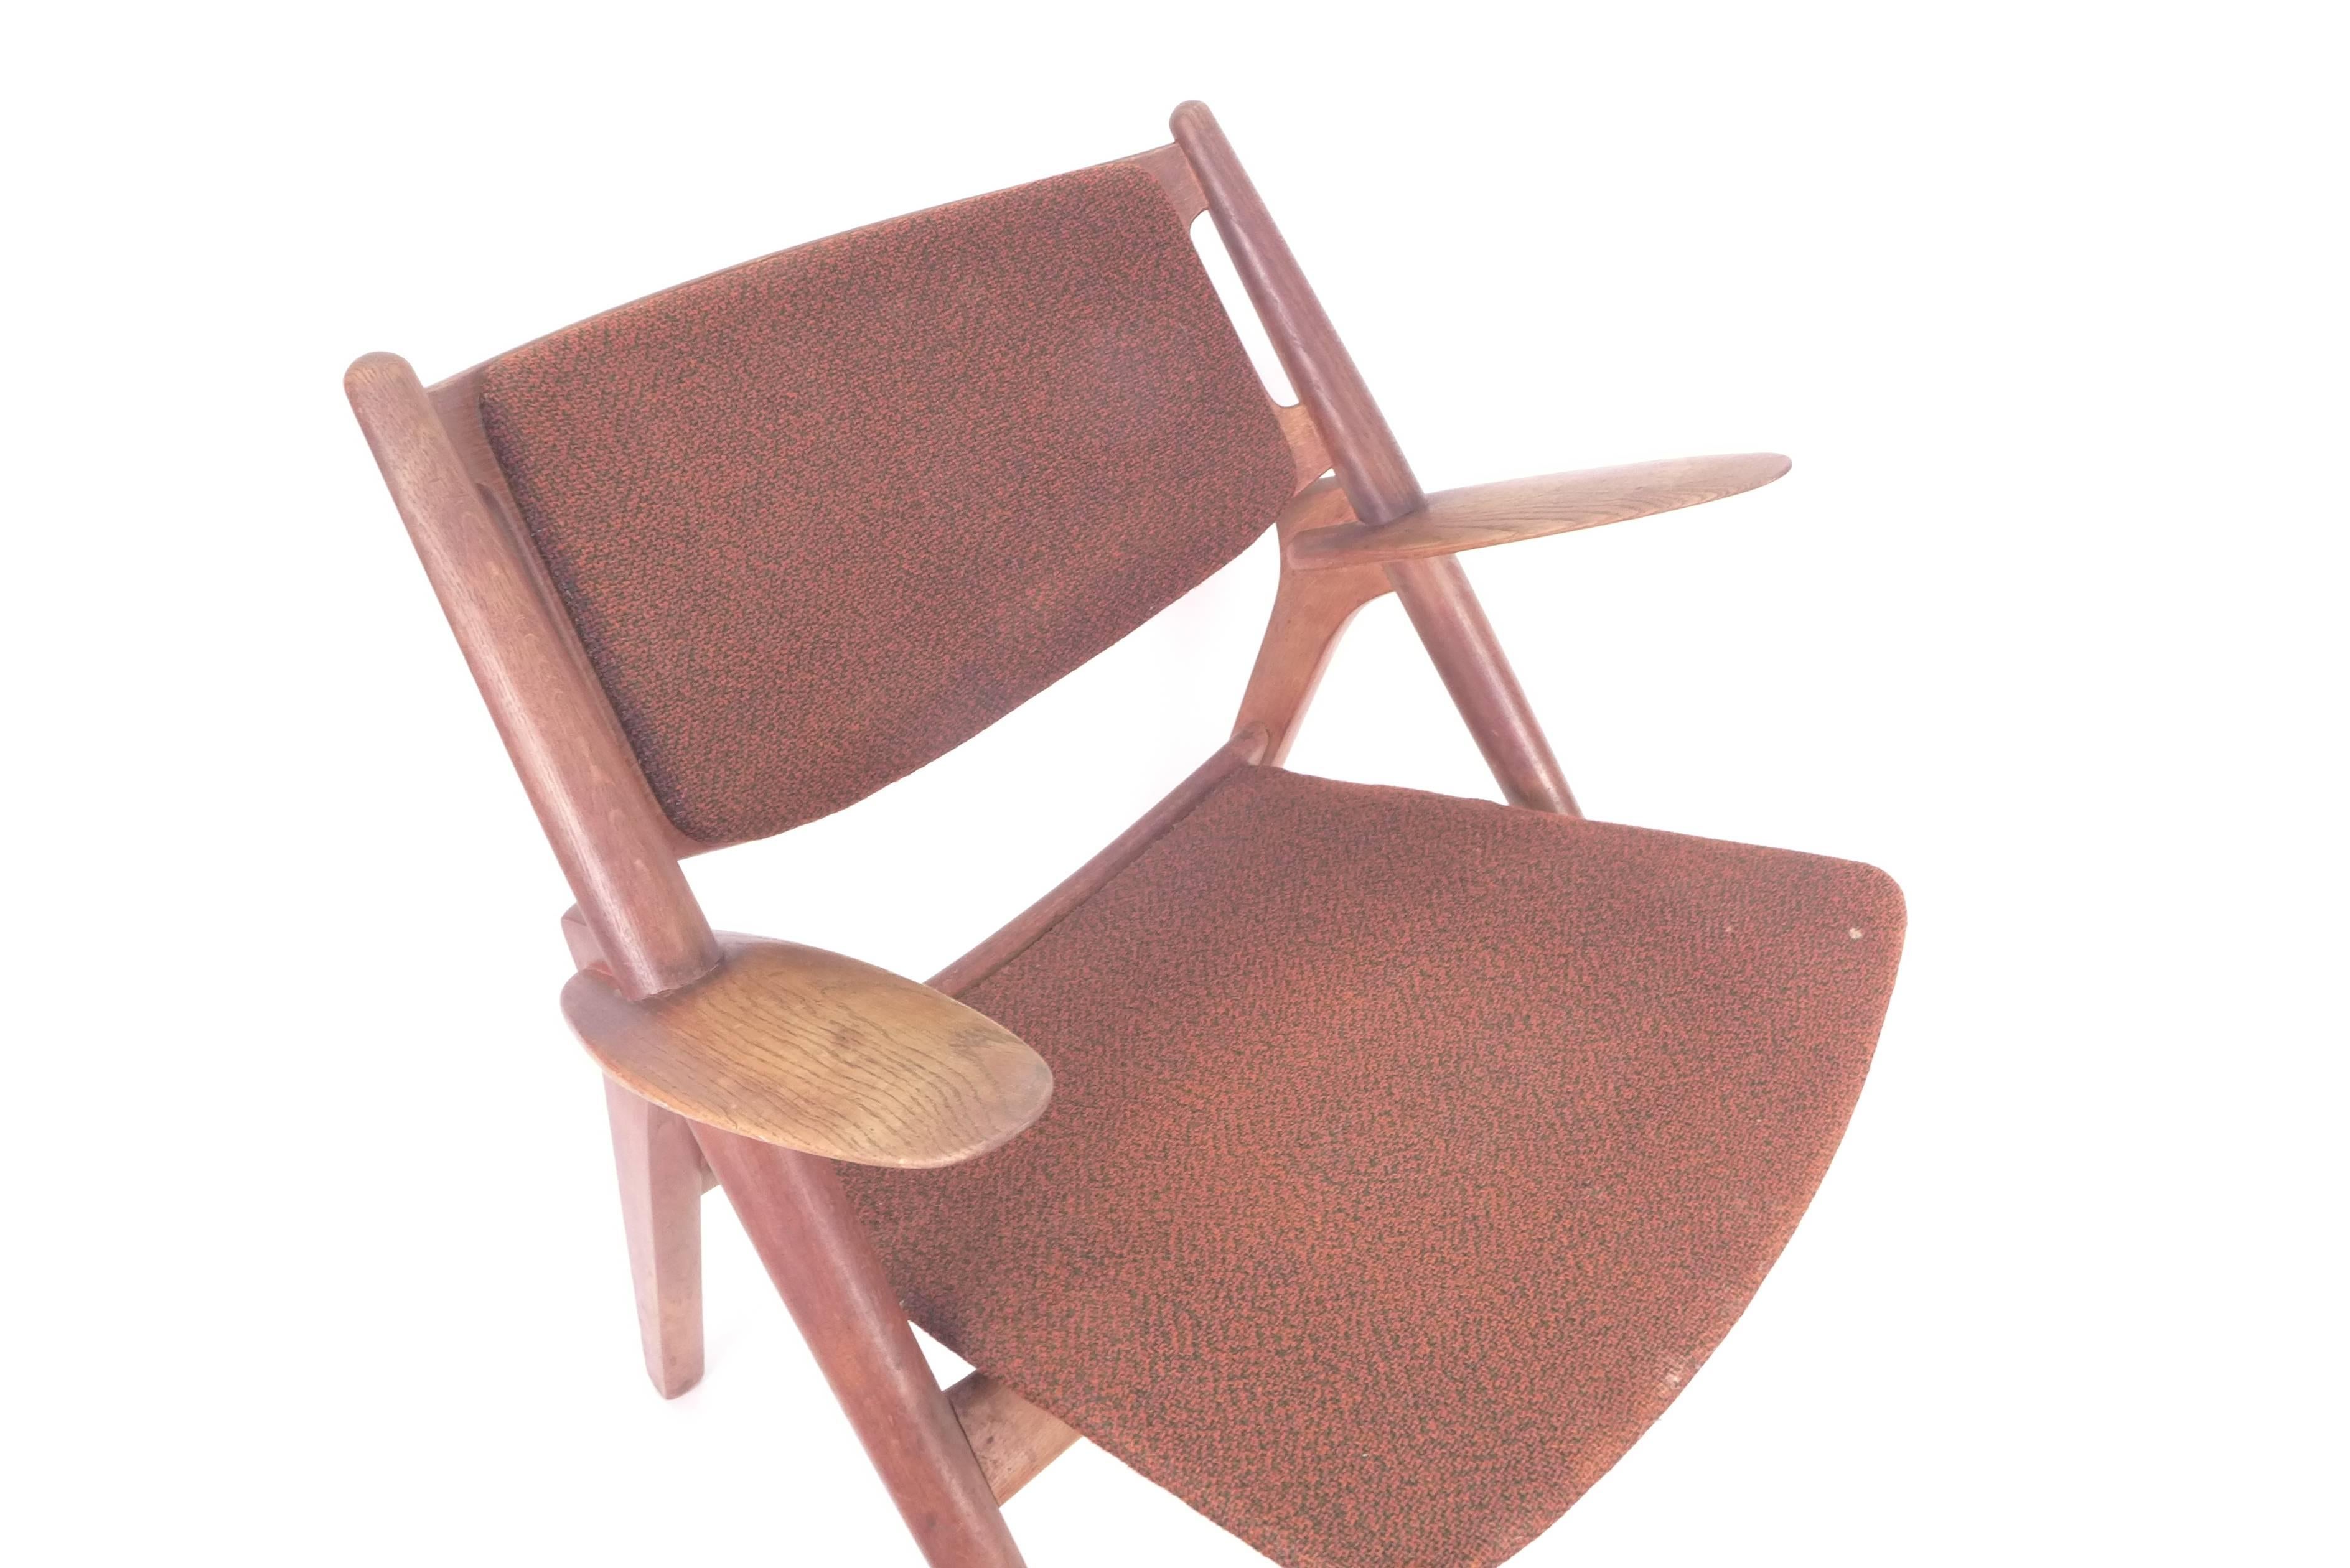 Sawback easy chair model no. CH-28 designed in 1951 by Hans J. Wegner for Carl Hansen & Søn. Solid oak and wool.
Probably manufactured during the 1950s.